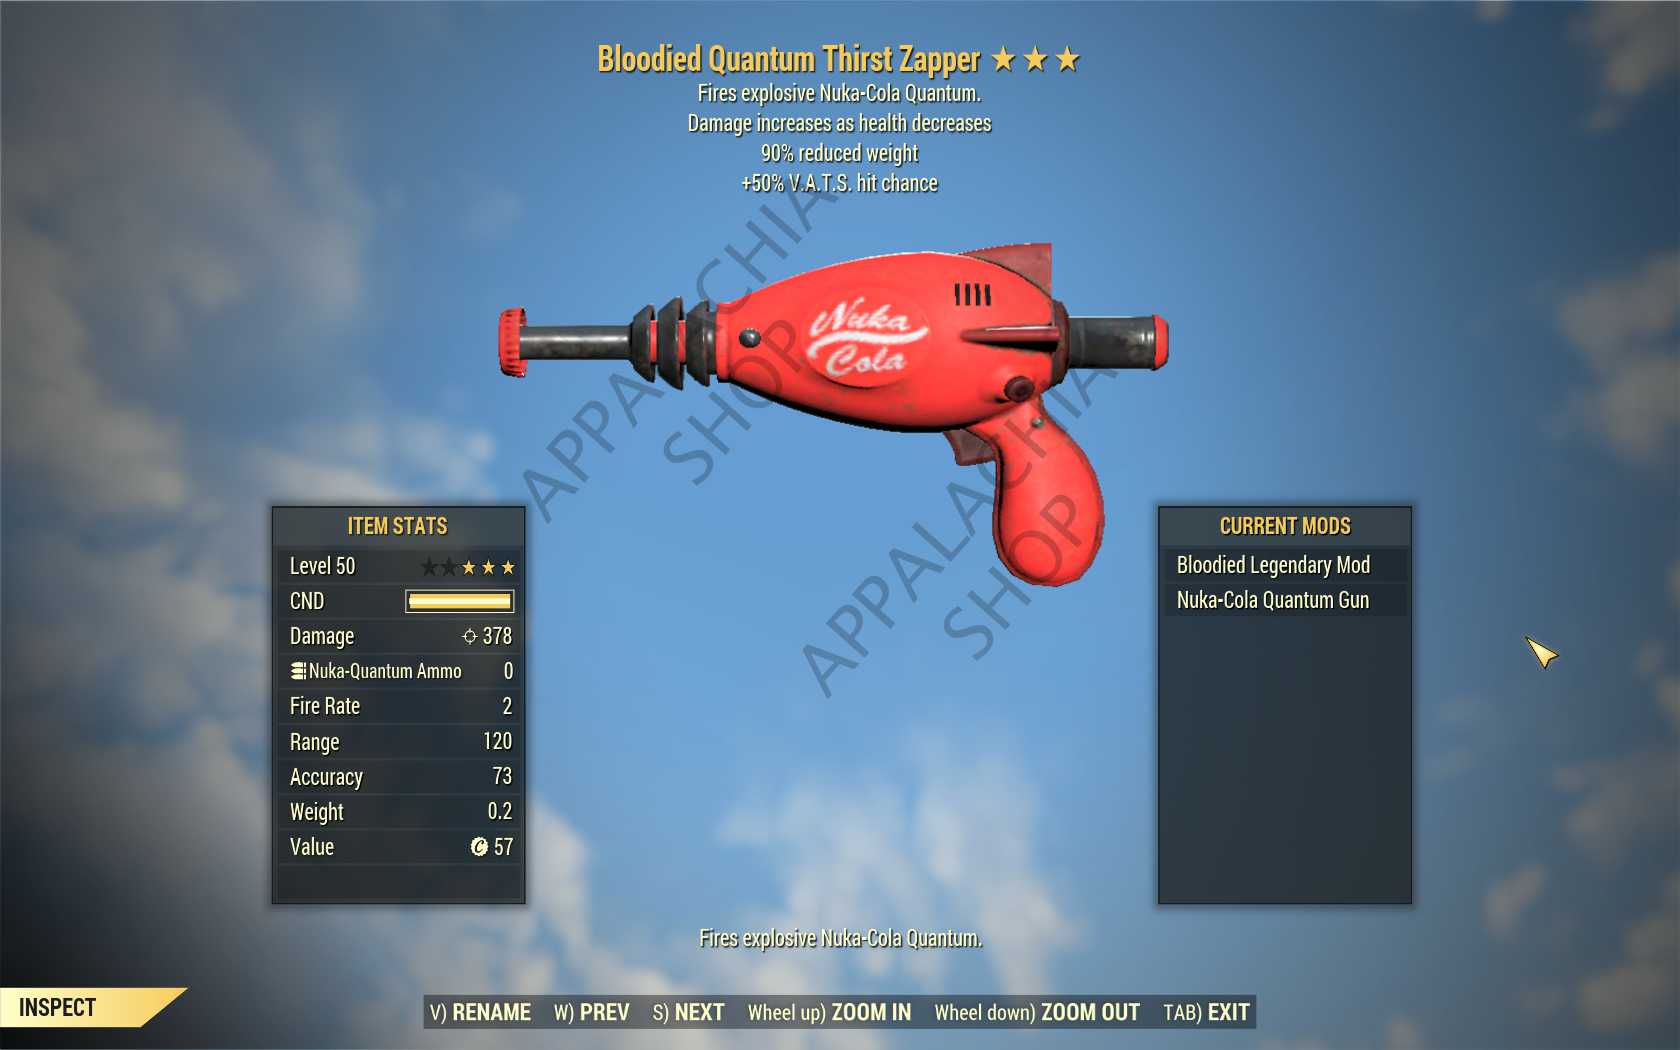 Bloodied Thirst Zapper (+50% VATS hit chance, 90% reduced weight)